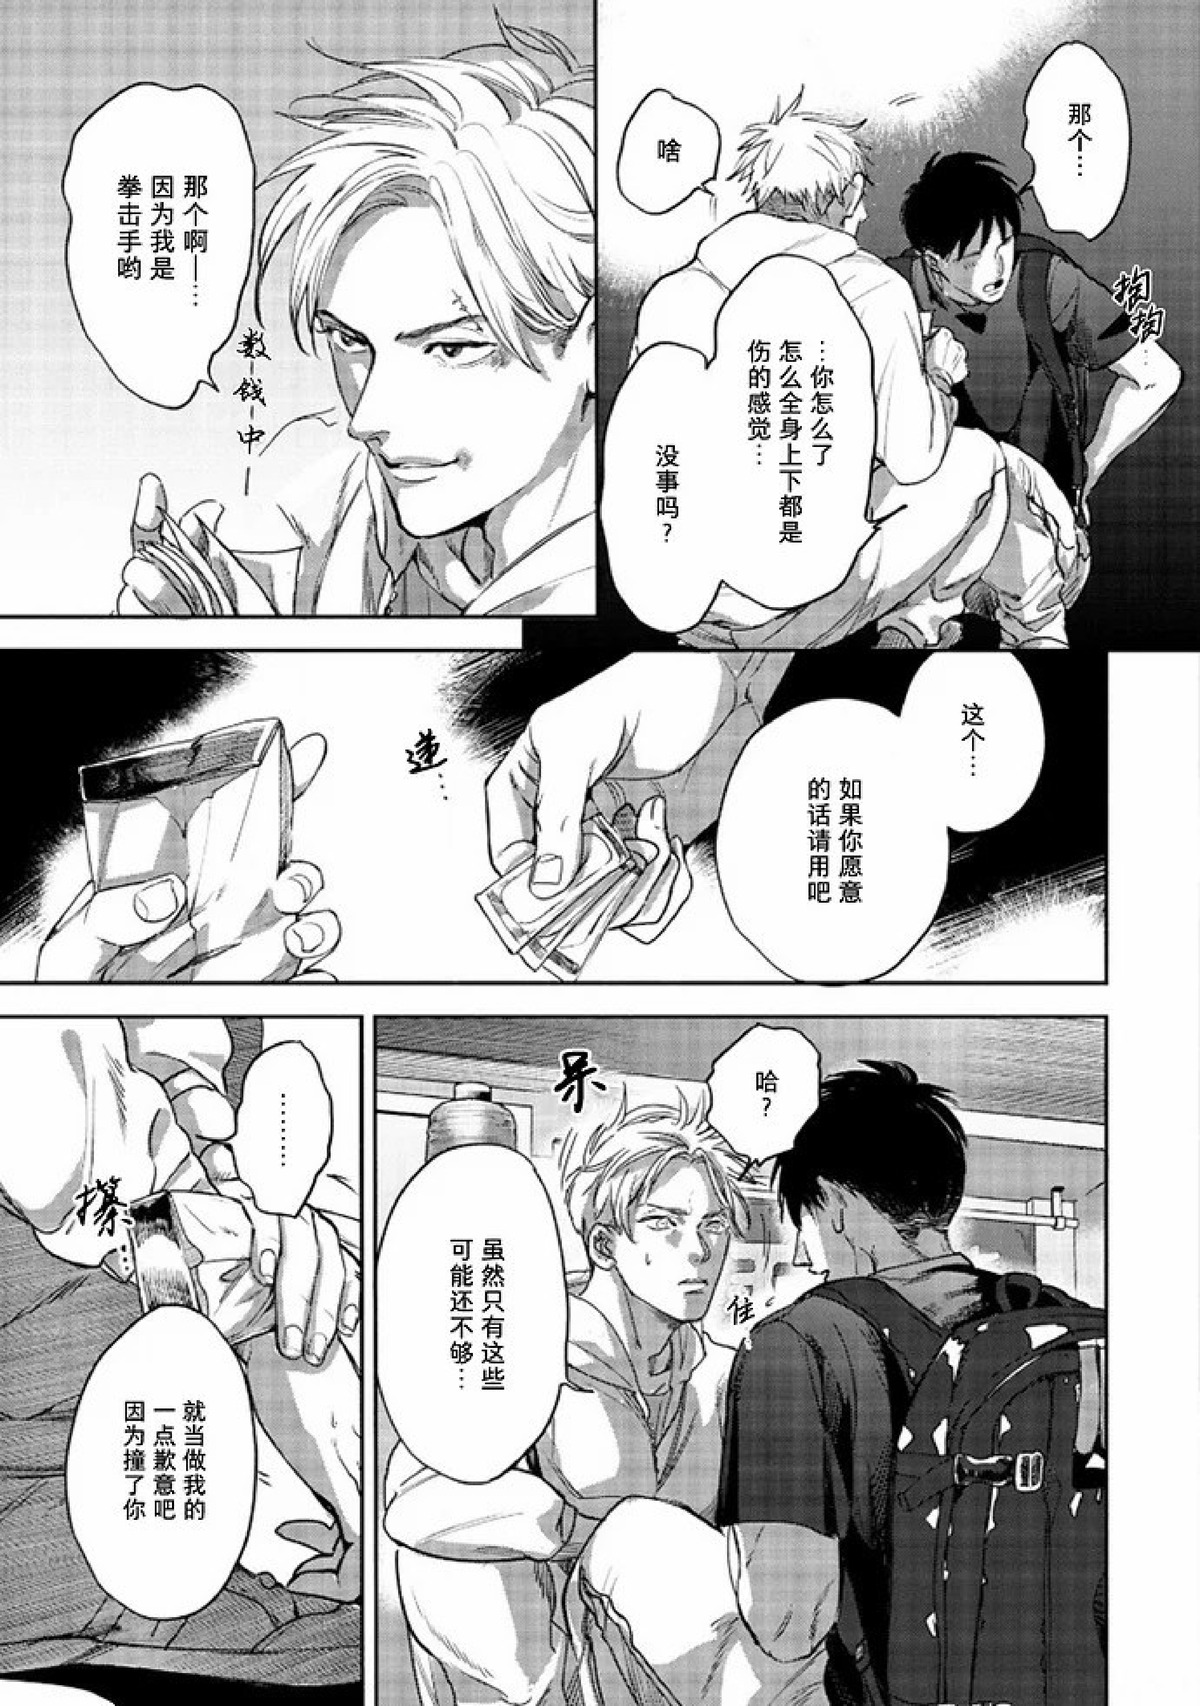 【Two sides of the same coin[腐漫]】漫画-（上卷01-02）章节漫画下拉式图片-37.jpg